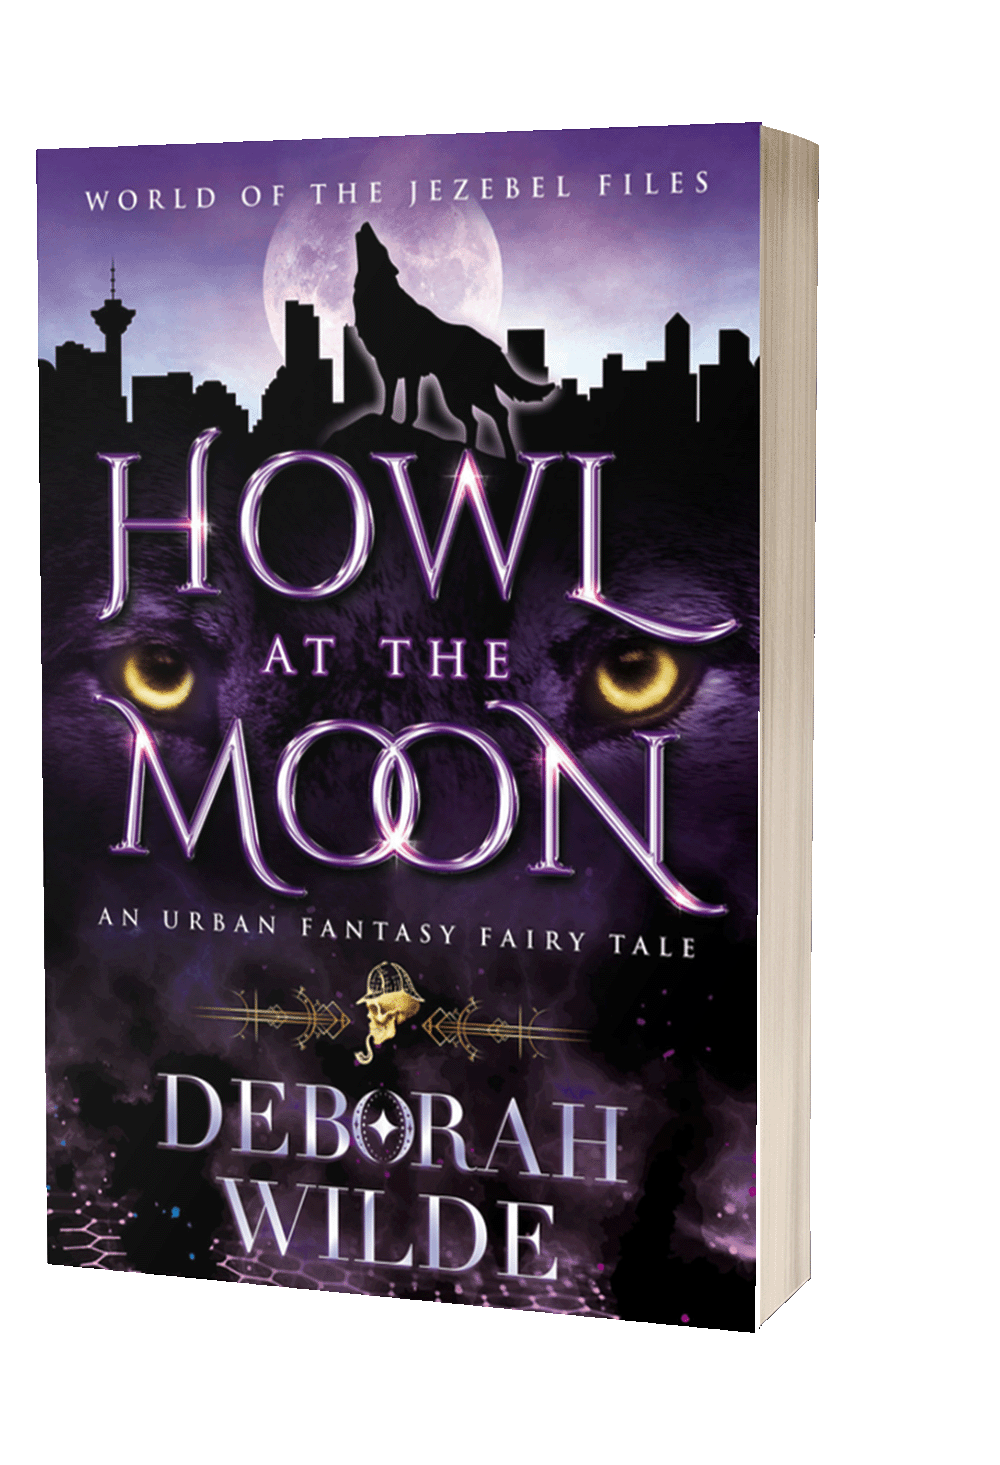 Paperback of Howl at the Moon book 1 of The World of the Jezebel Files urban fantasy duology by Deborah Wilde.